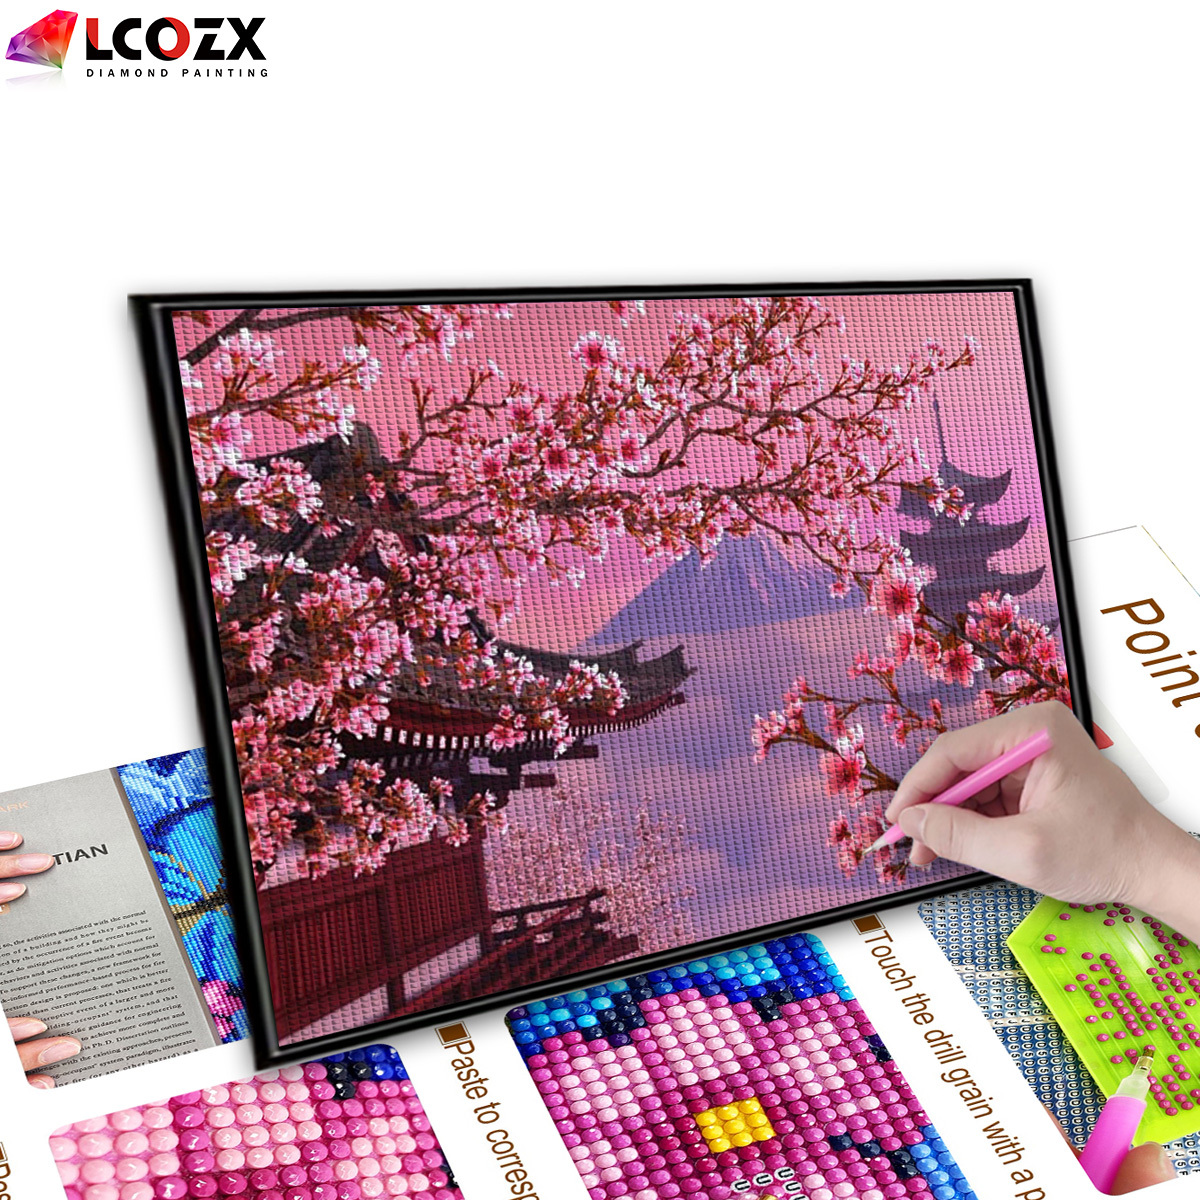 Mount Fuji Sakura Paint By Number Kit DIY Acrylic Painting Canvas for  Adults Kid